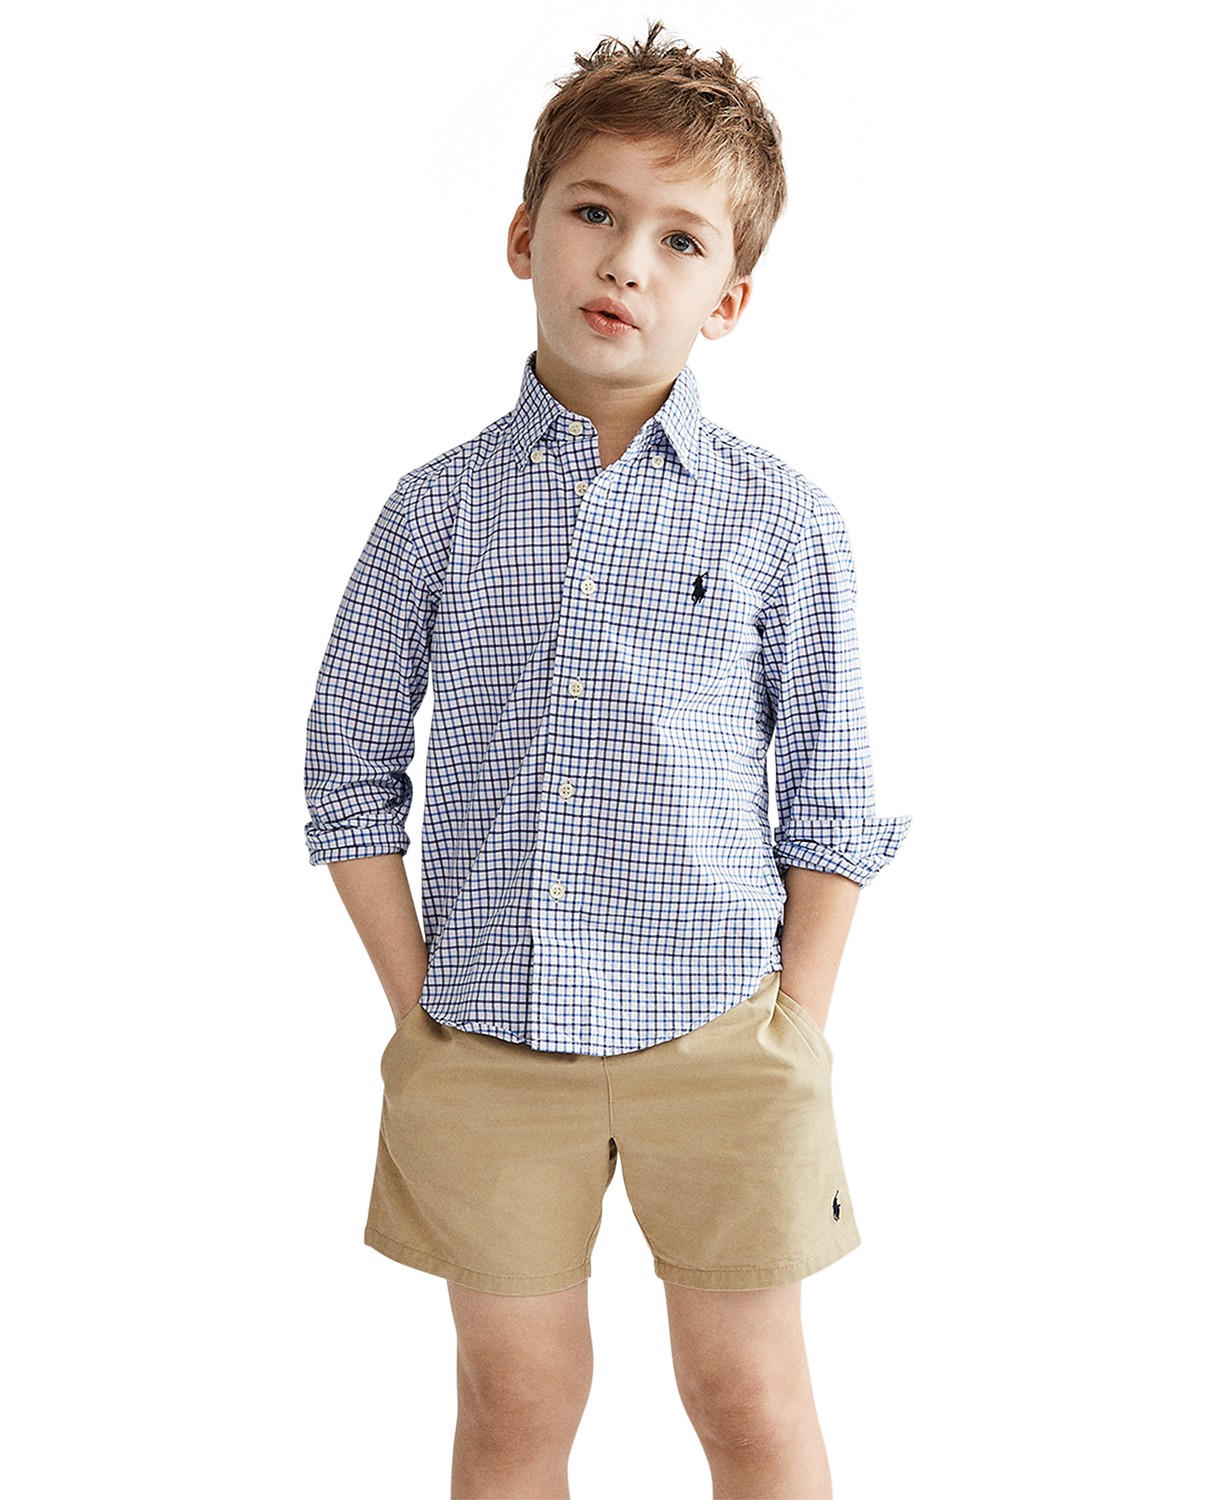 Toddler and Little Boys Plaid Cotton Shirt